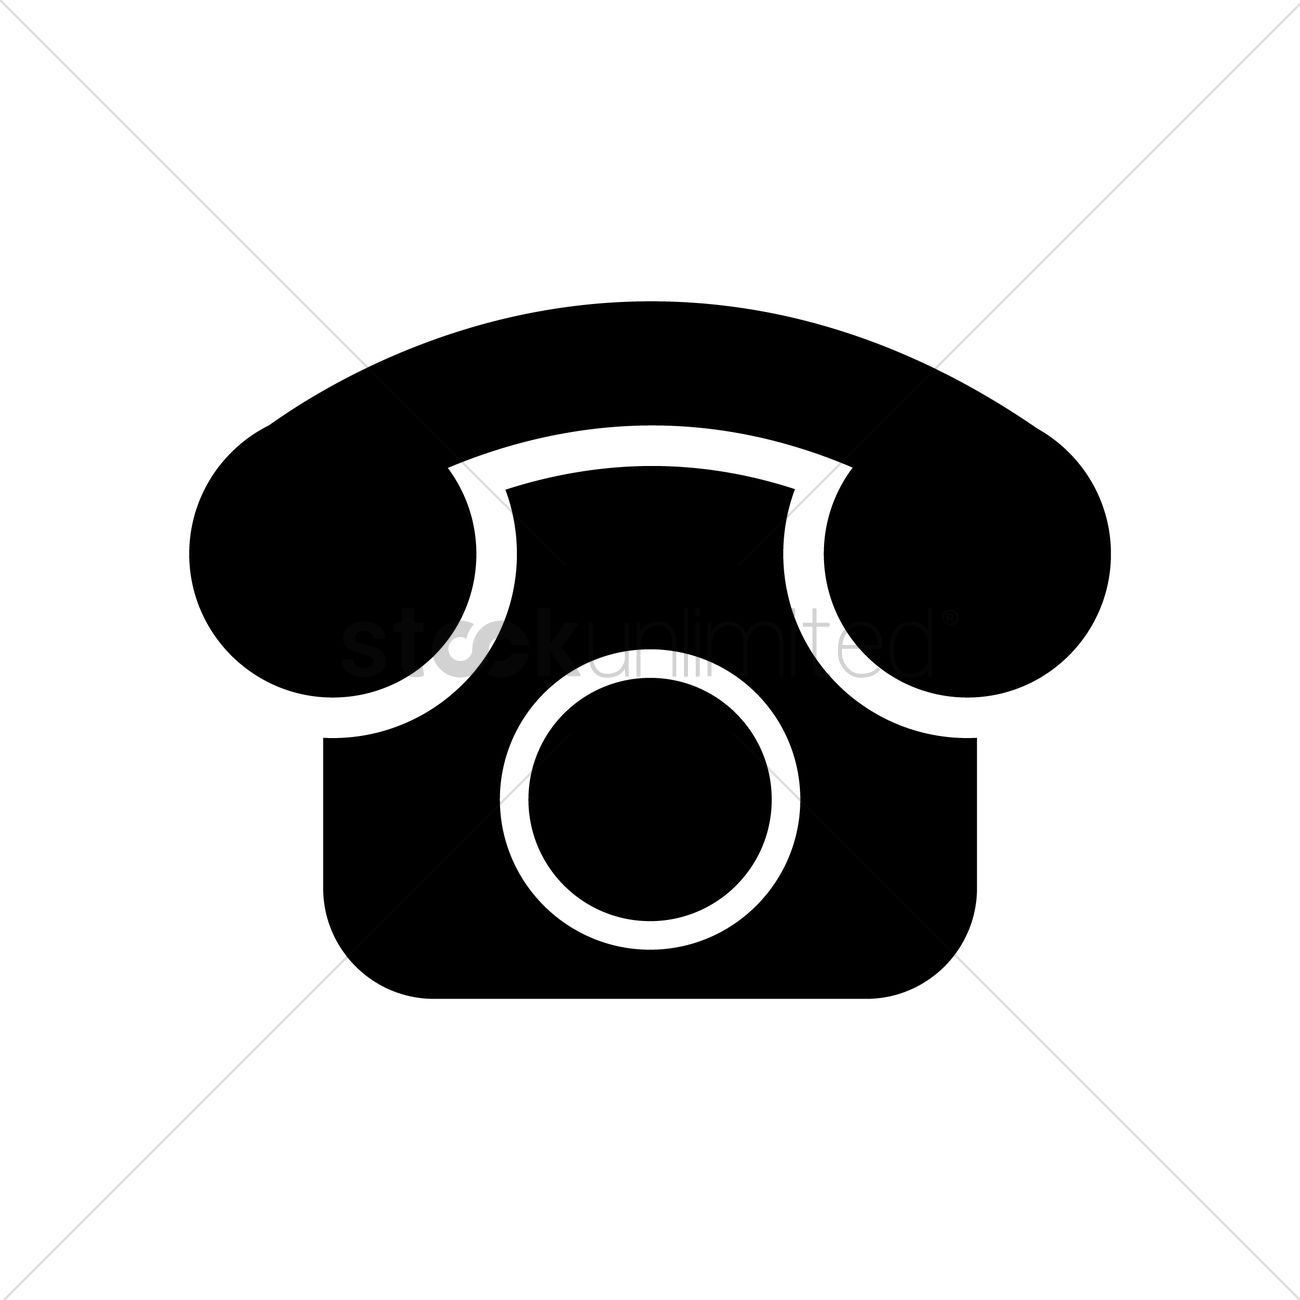 Telephone Vector Free - (5539 Free Downloads)